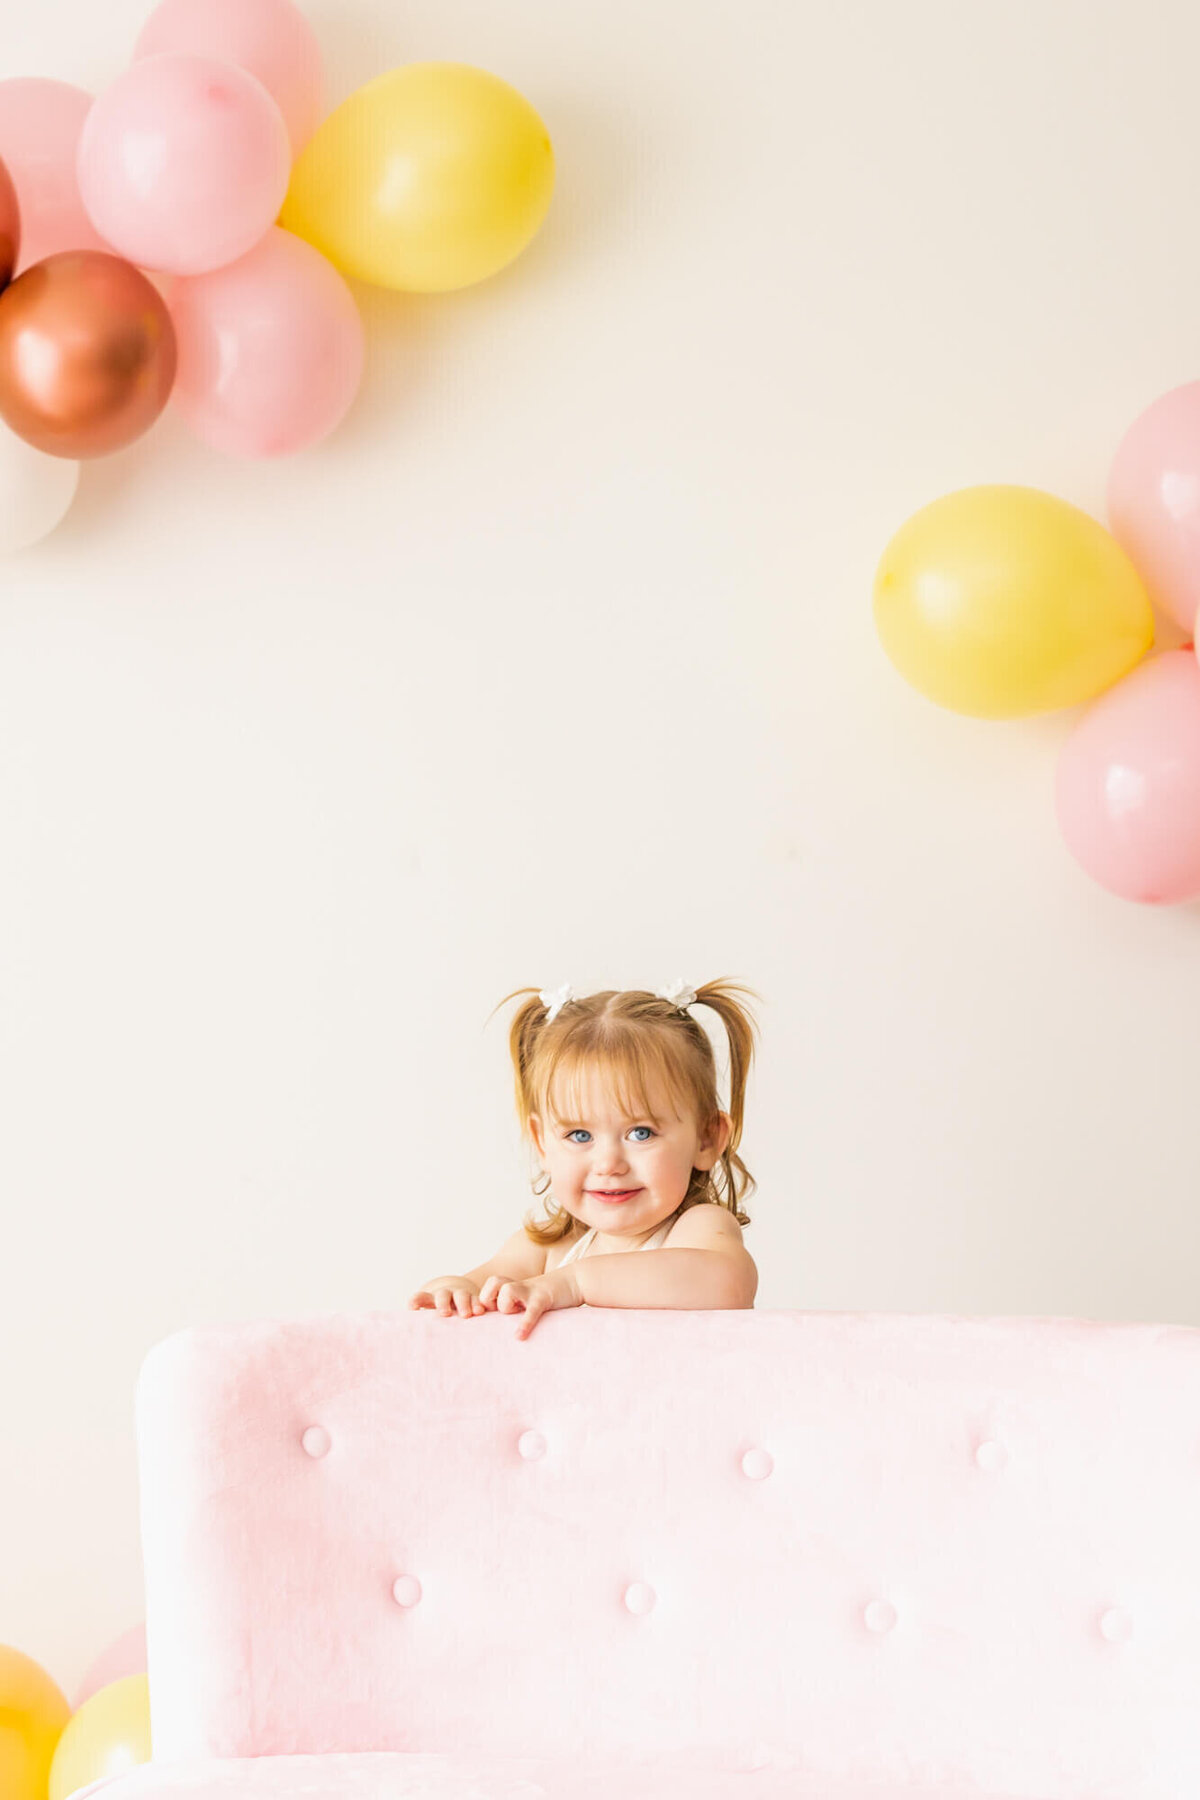 Toddler girl dresses in bell bottoms and a lace romper standing behind a pink couch